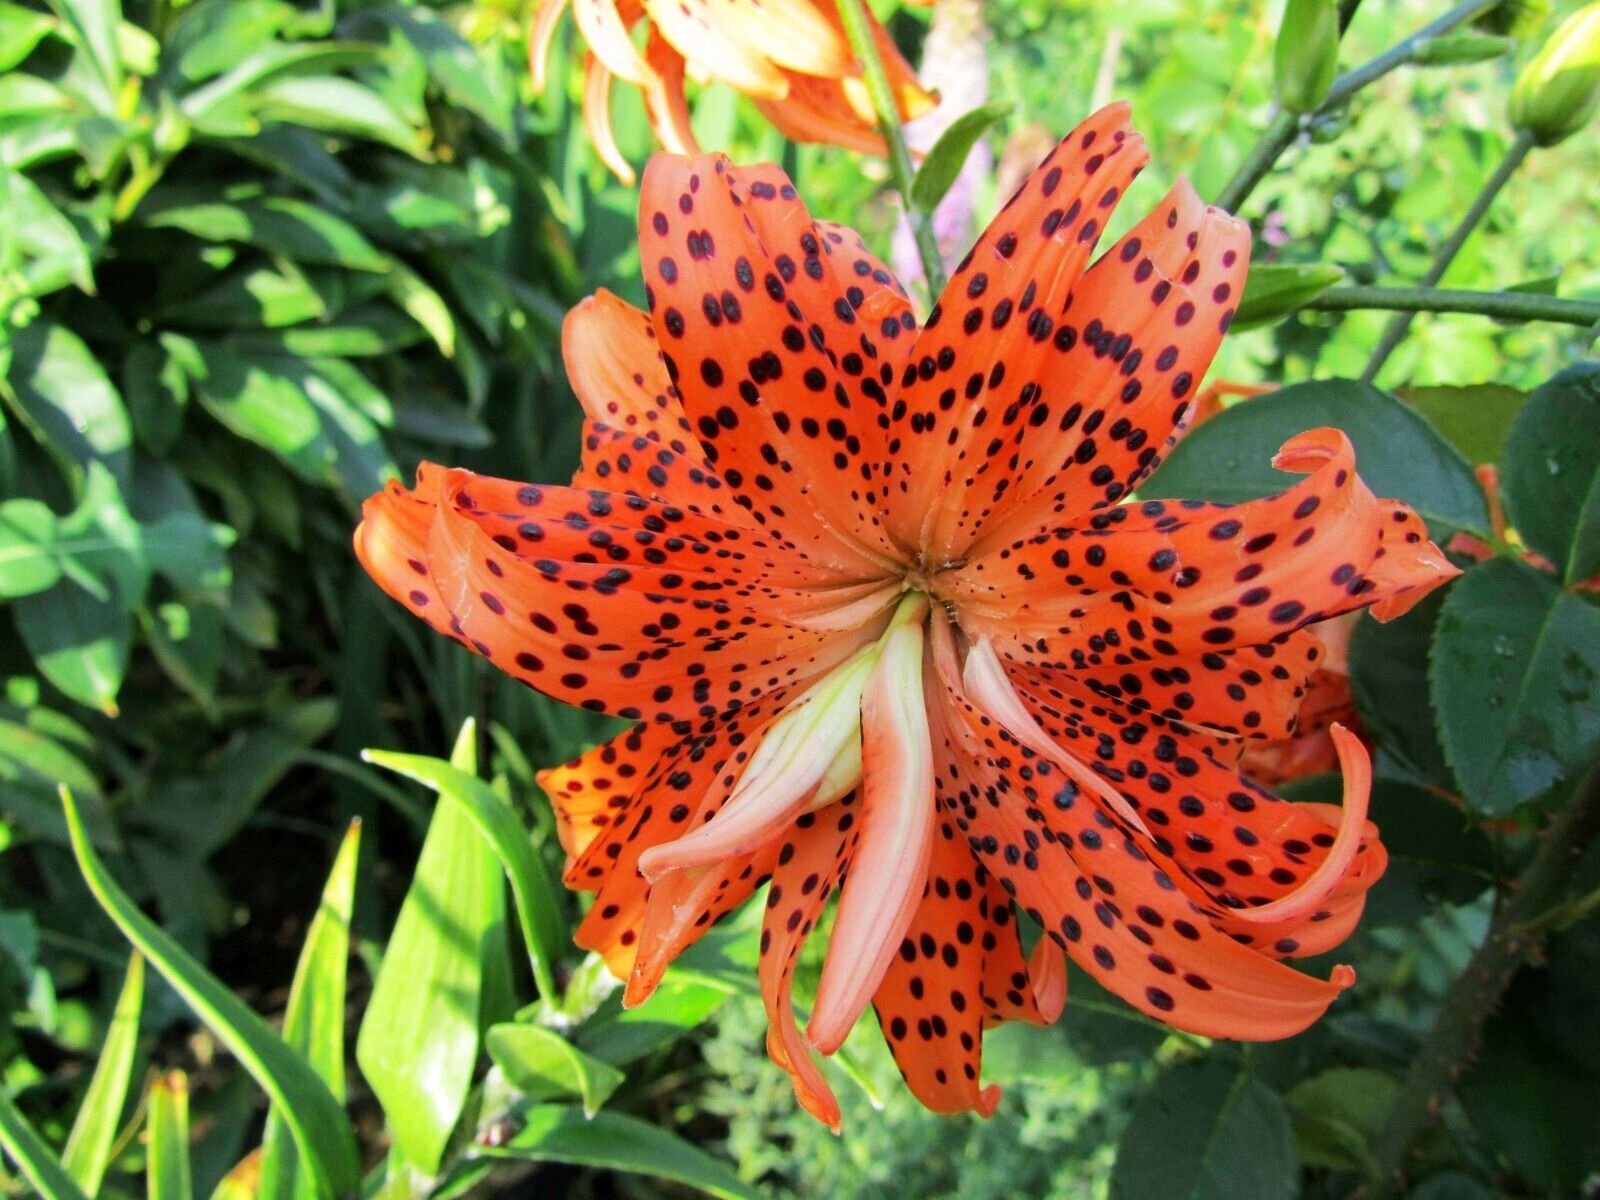 TIGER LILY ~FLORE PLENO~ FLOWER BULBS HARDY 3-5 FT. TALL PERENNIAL PLANTS UNIQUE